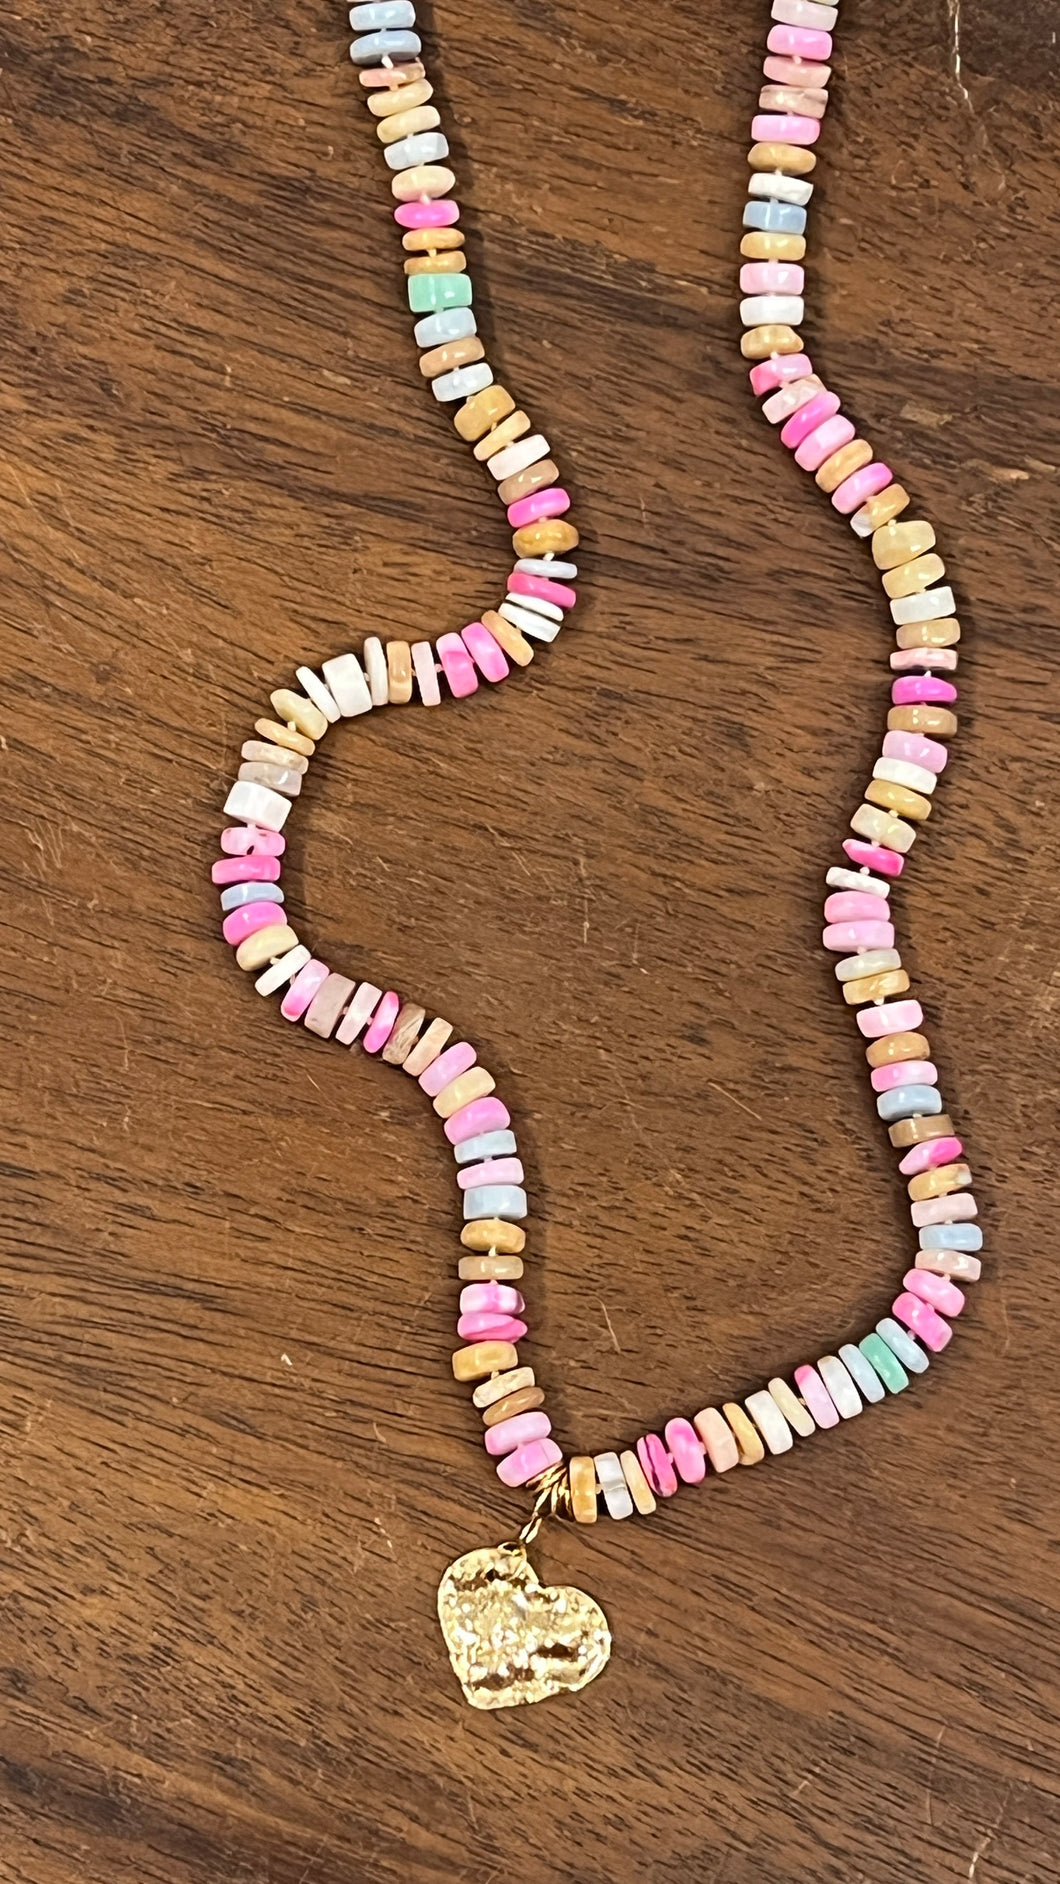 Candy Opal Necklace with Hammered Heart Pendant